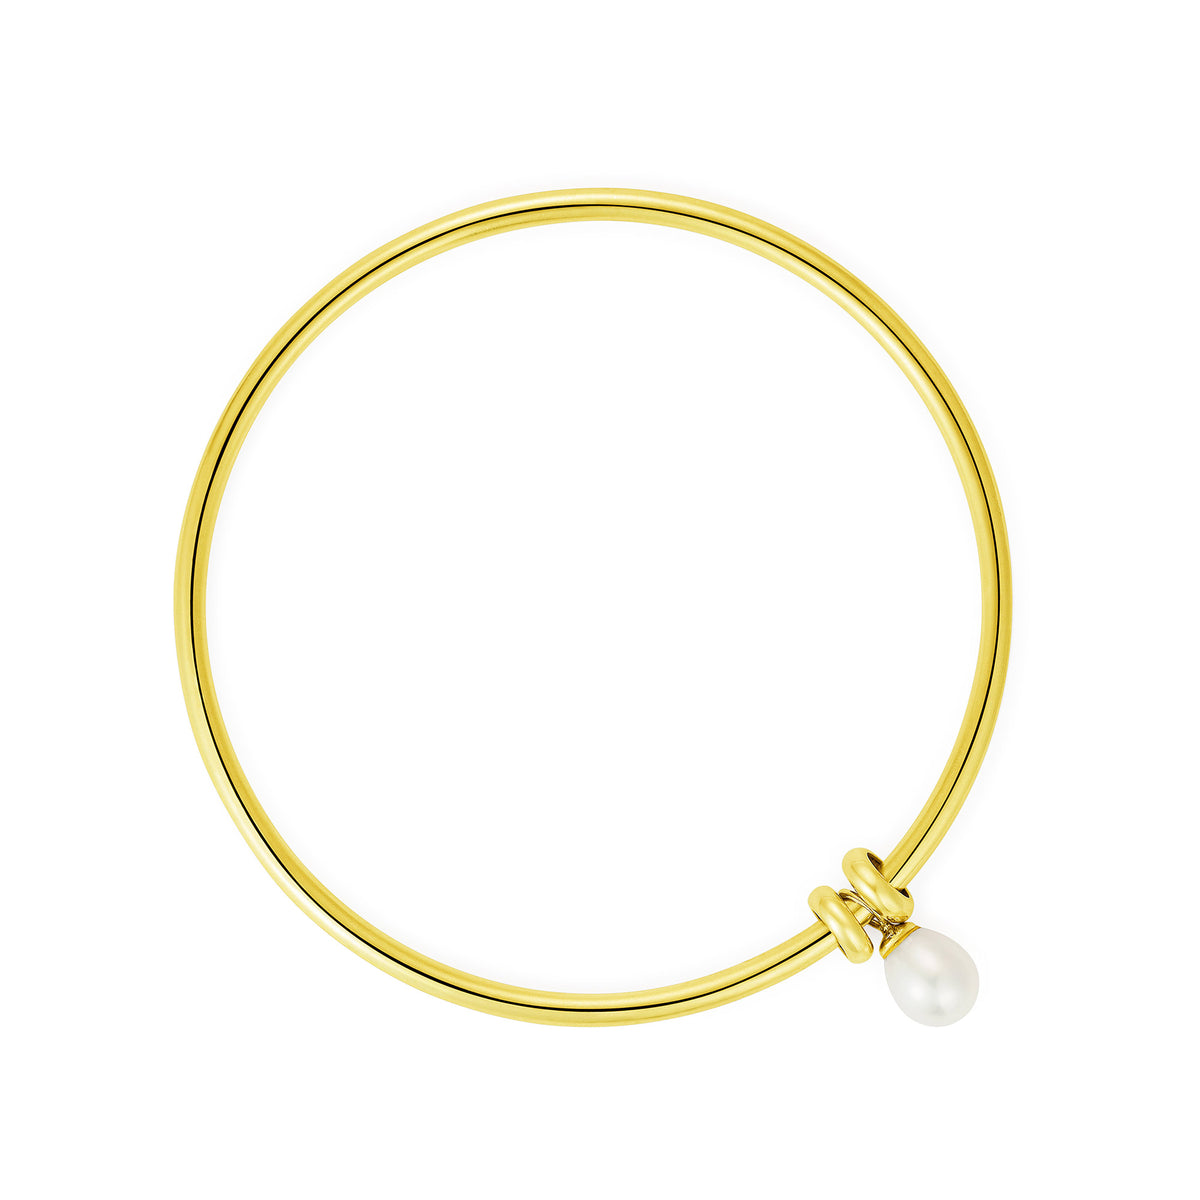 Gold plated sterling silver bangle with a pearl charm